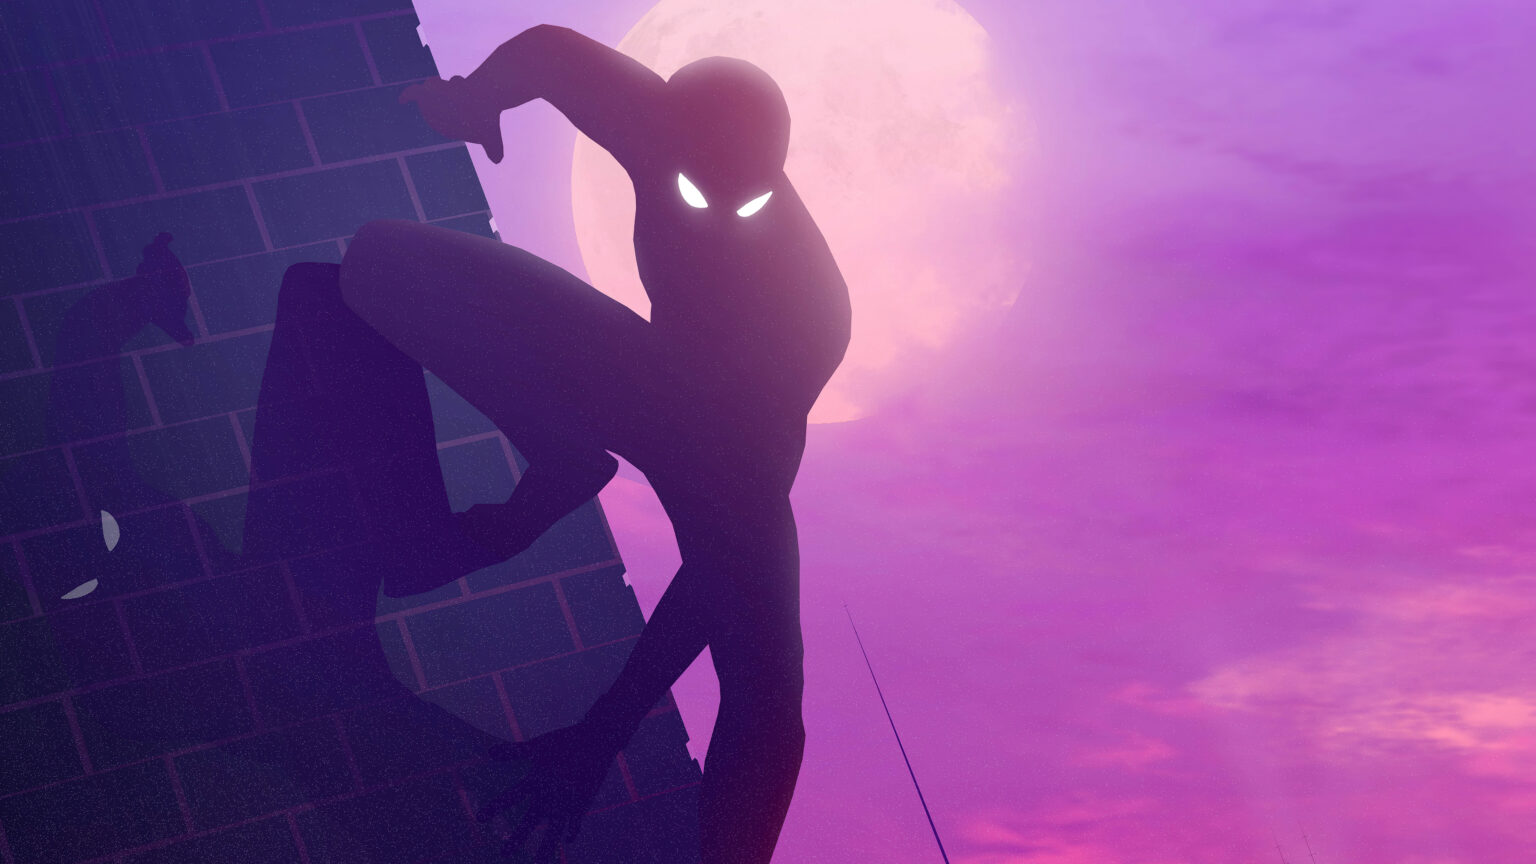 Spider-Man: No Way Home for ios download free